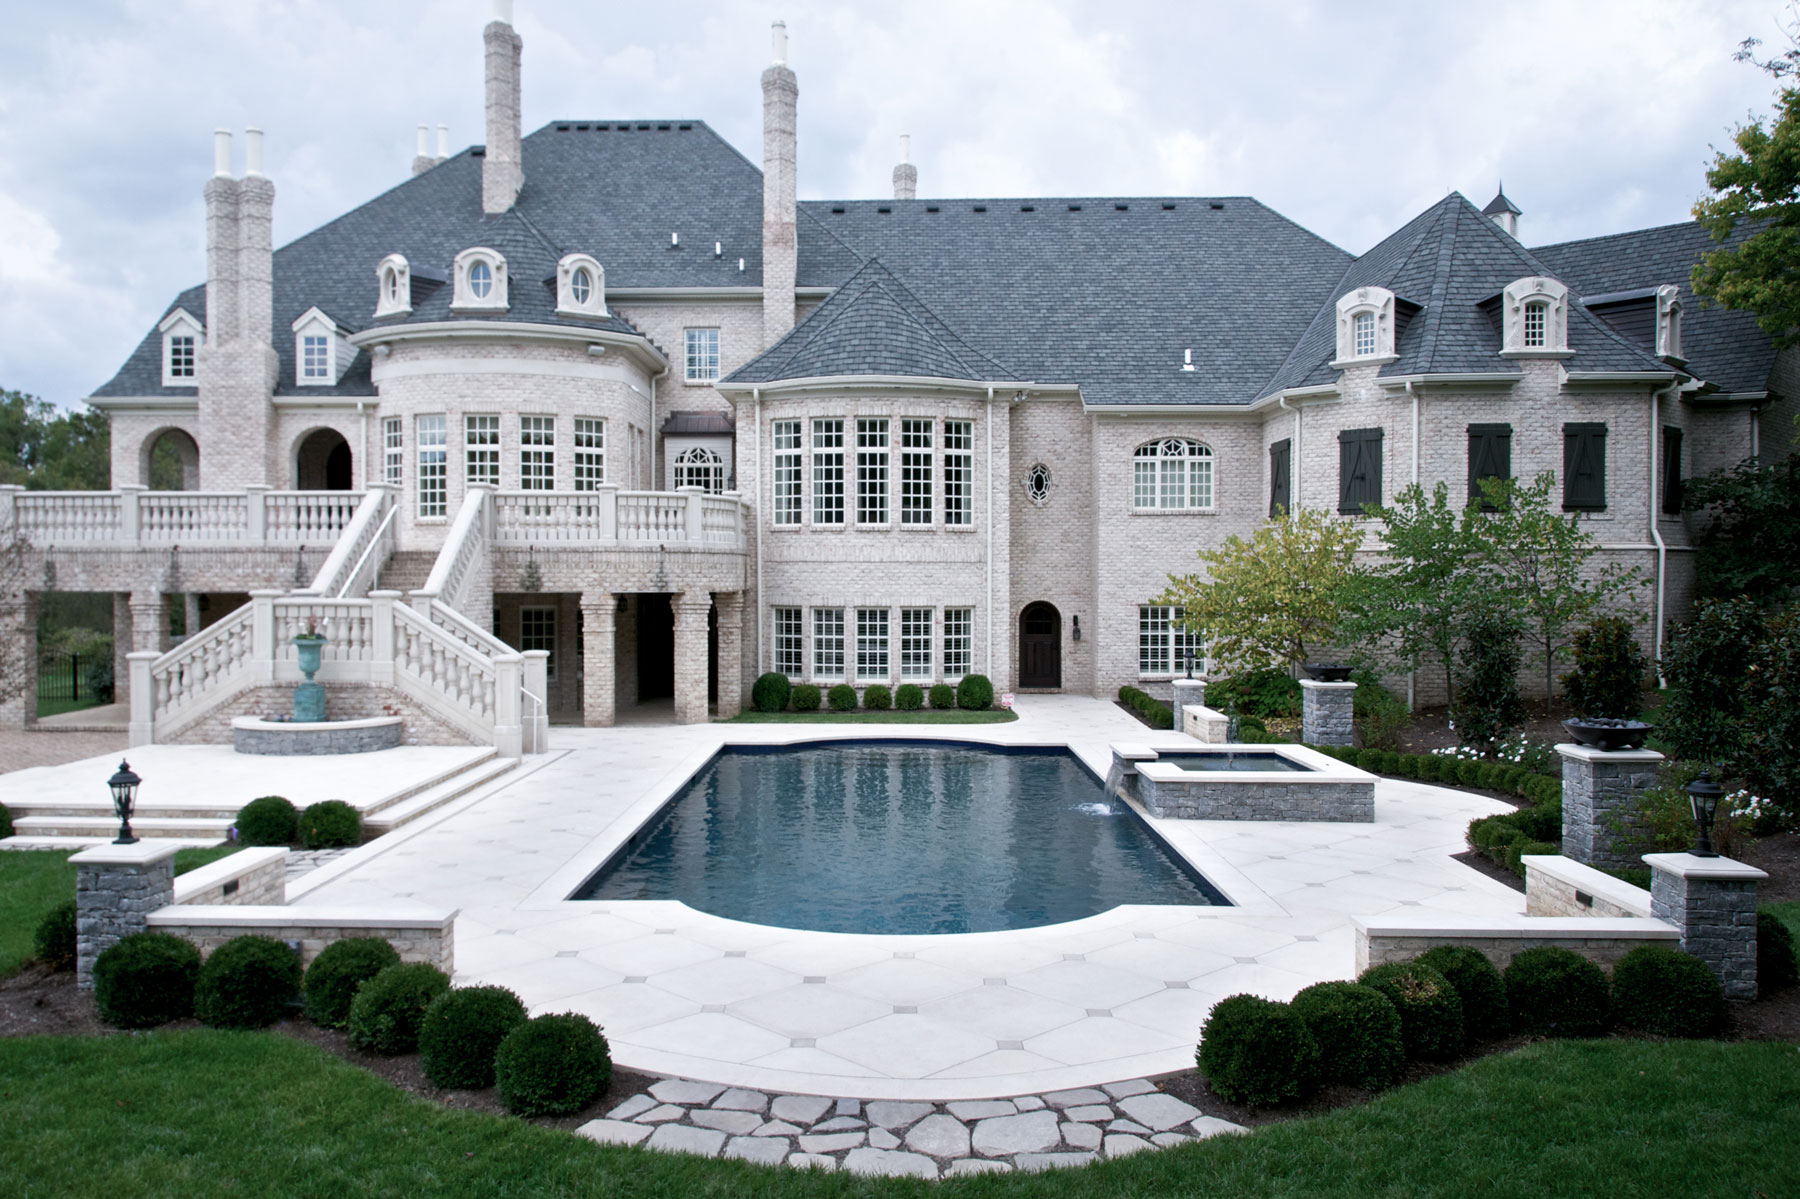 This palatial estate, with its extensive pool patio space, has stark pool coping pavers